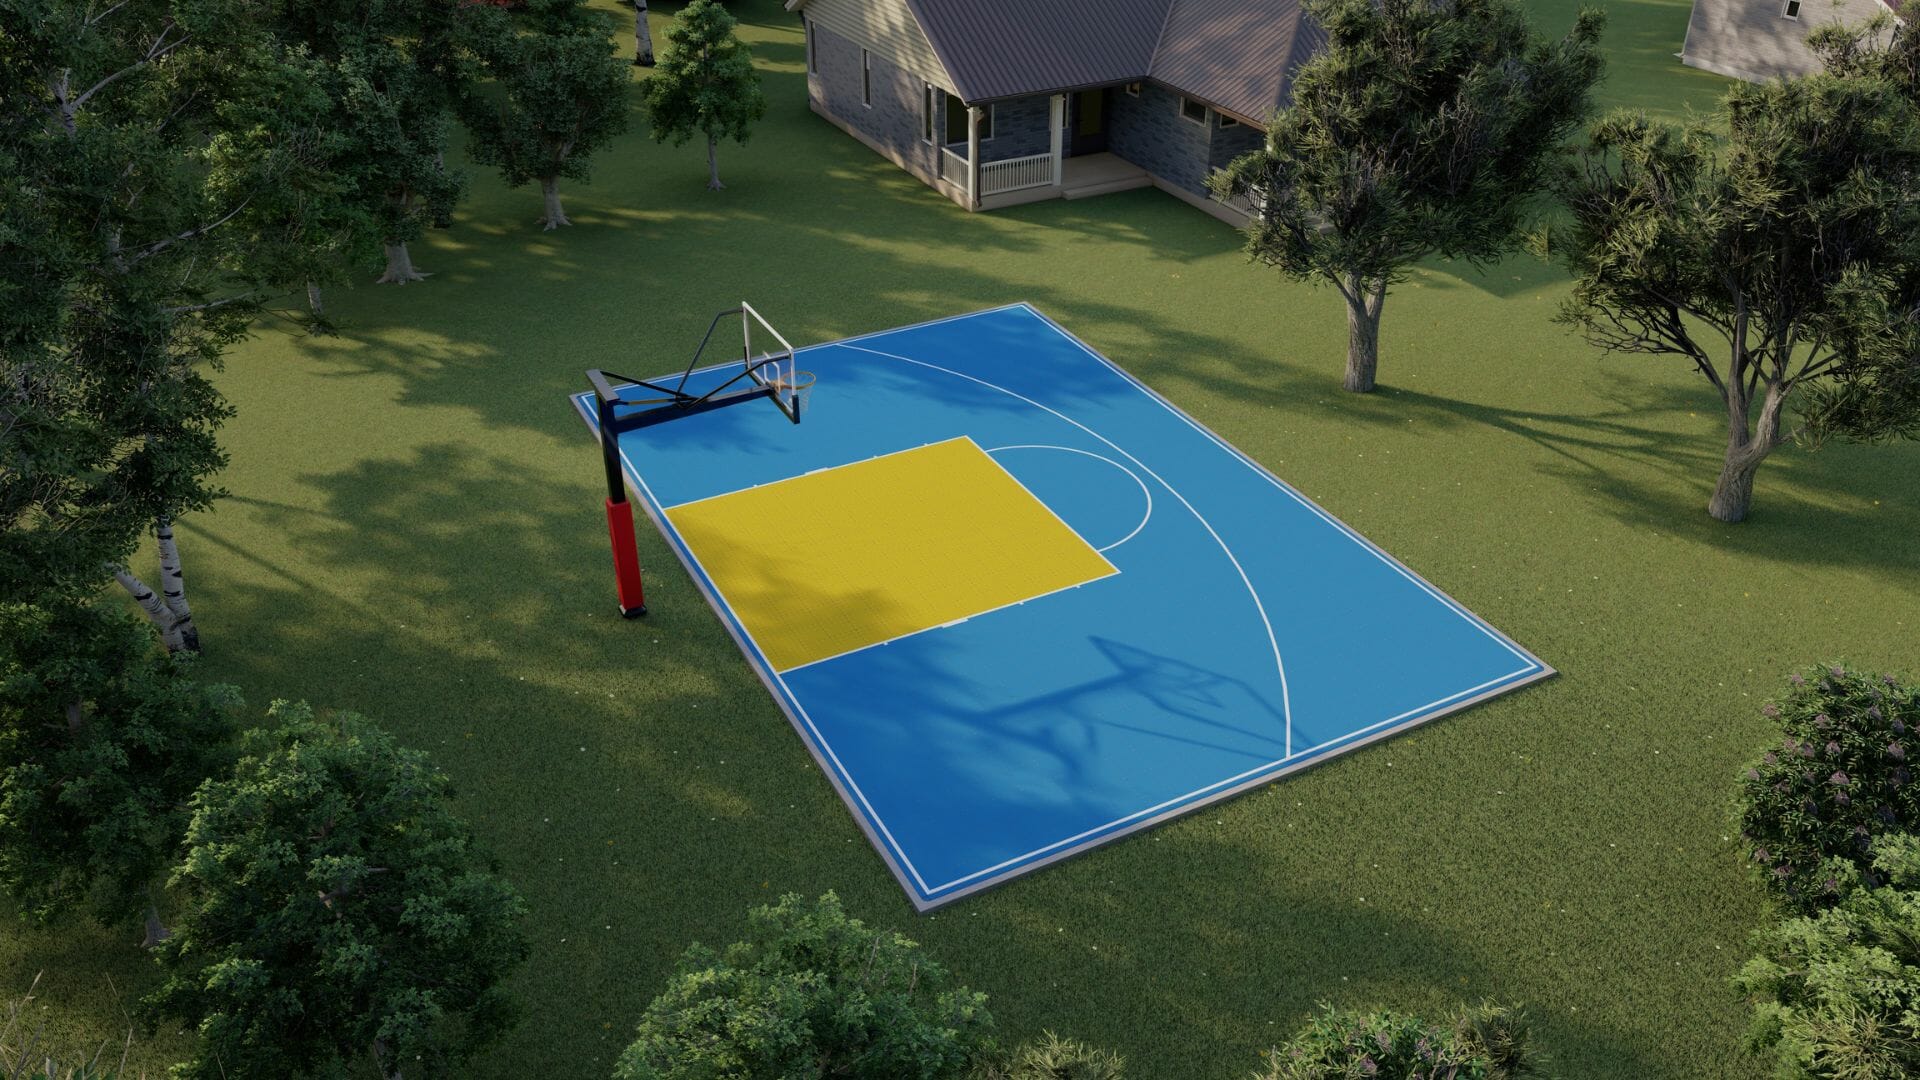 Basketball Half Court Dimensions: A Guide to the Court Layout and